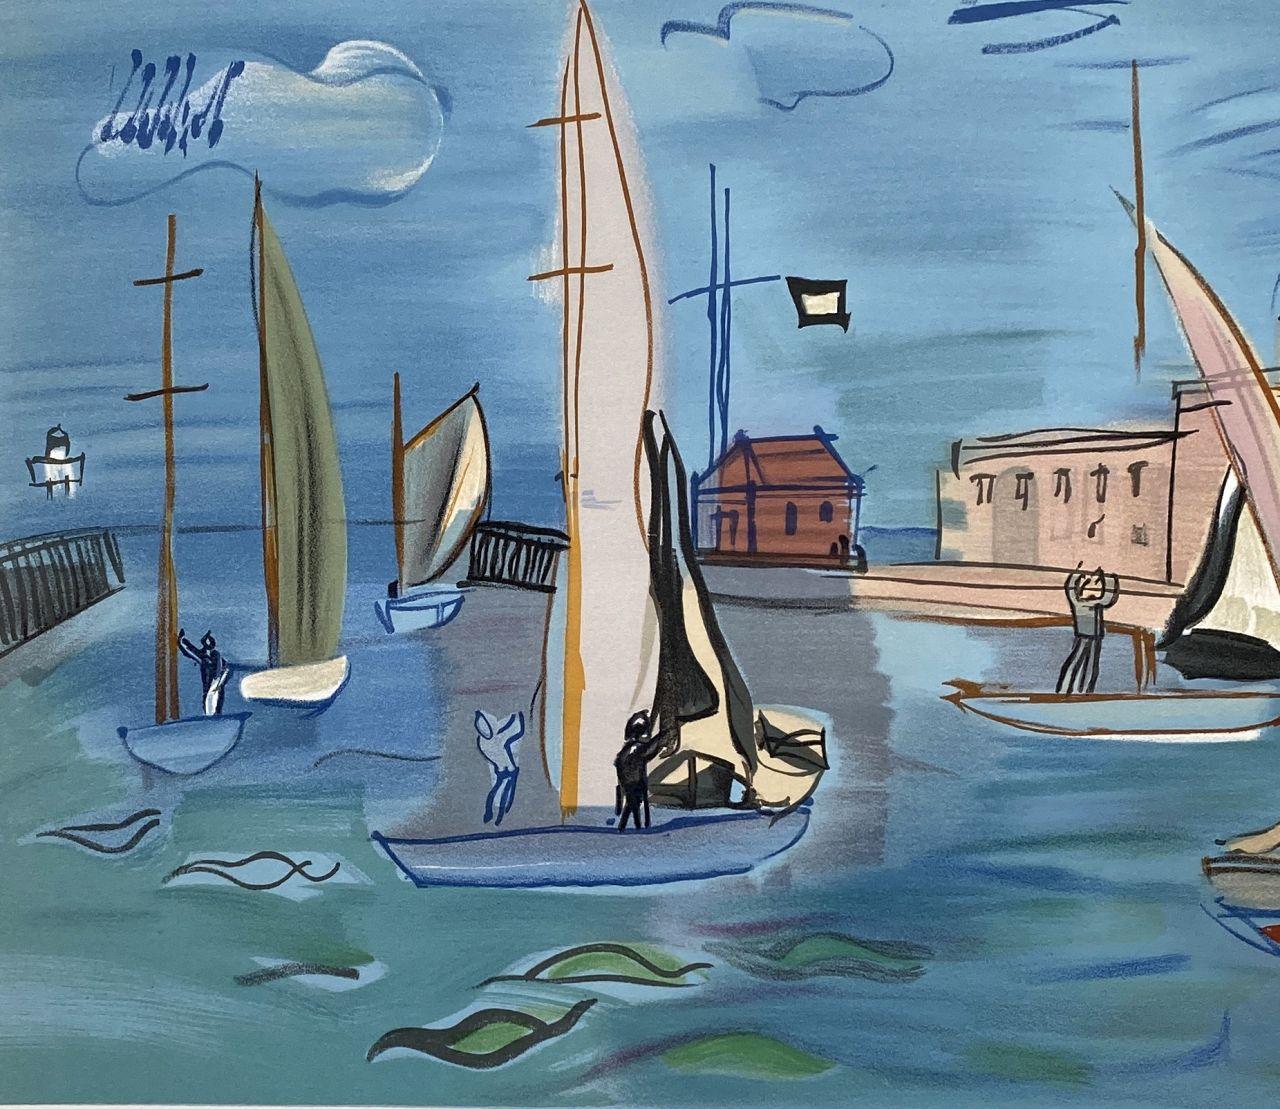 Sailboats - Lithograph Signed in the Plate (Mourlot) - Gray Landscape Print by (after) Raoul Dufy